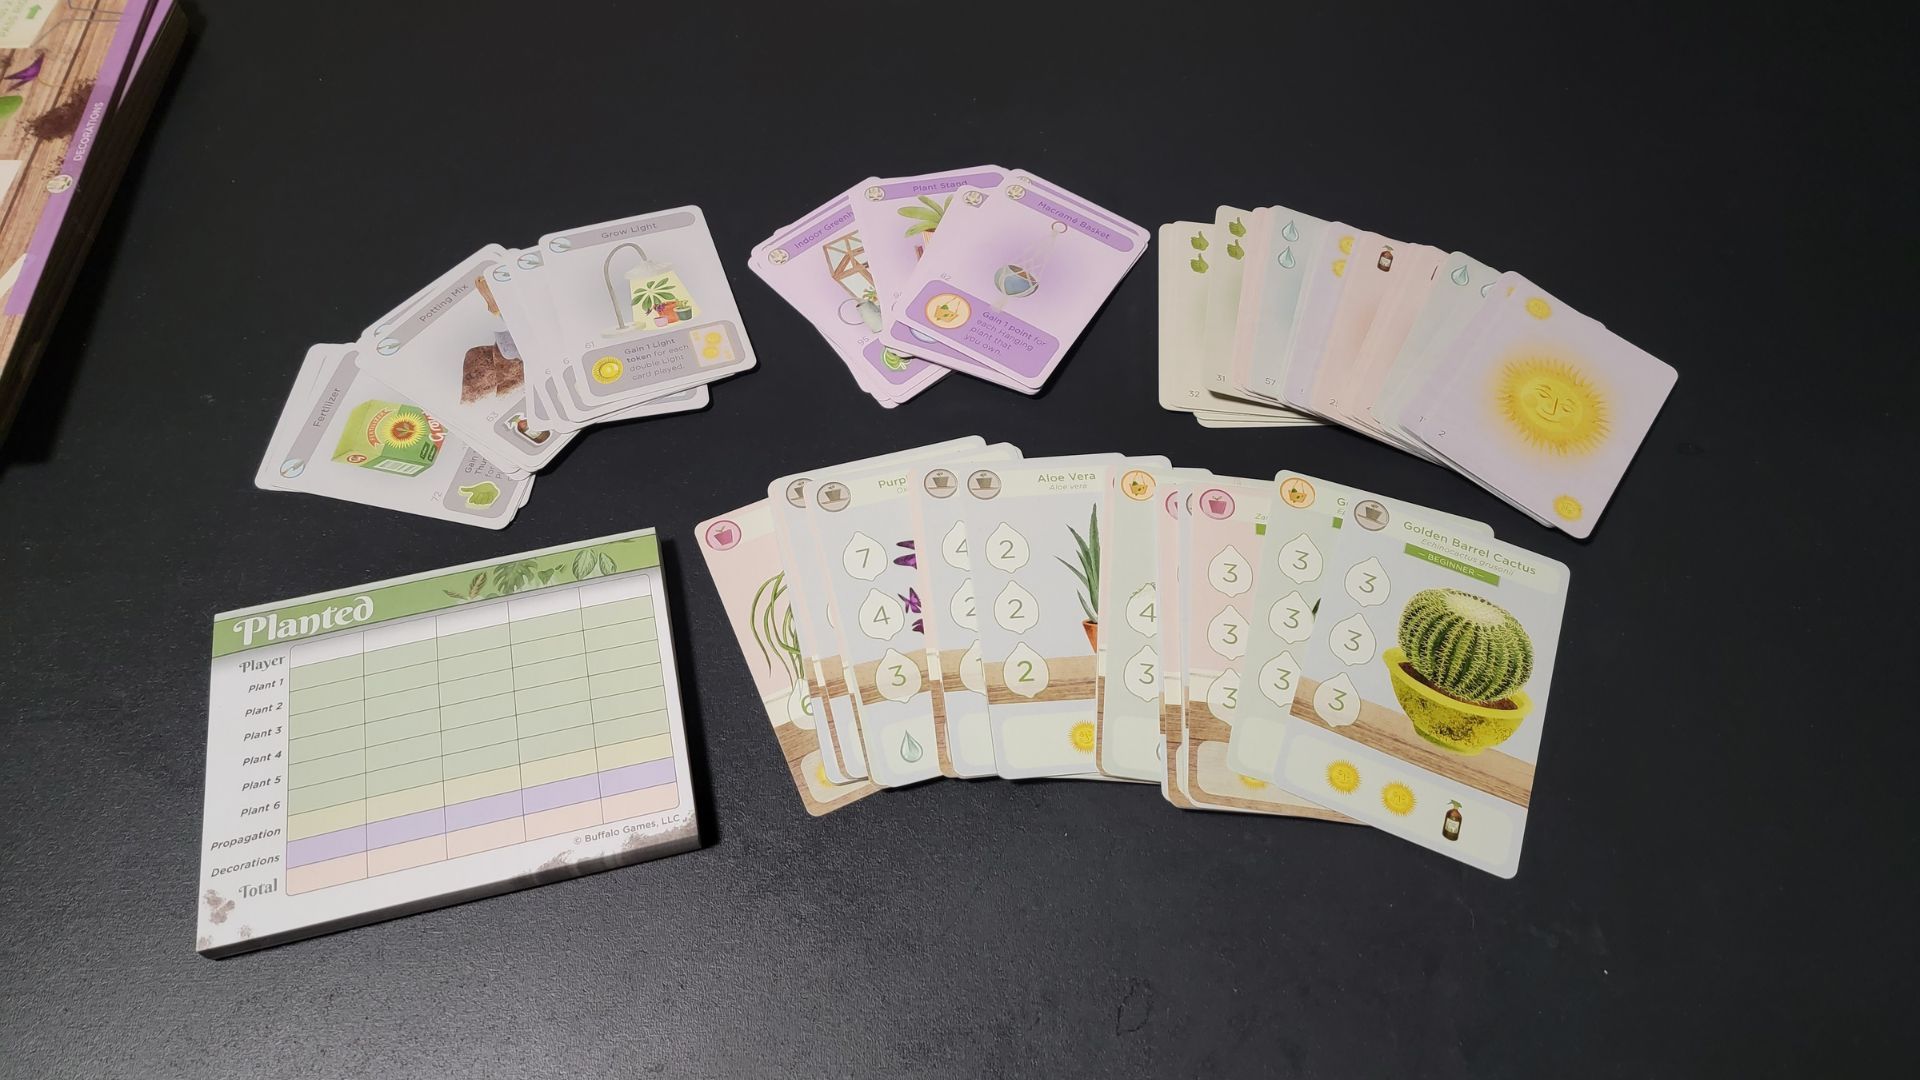 Planted board game playing cards and score pad